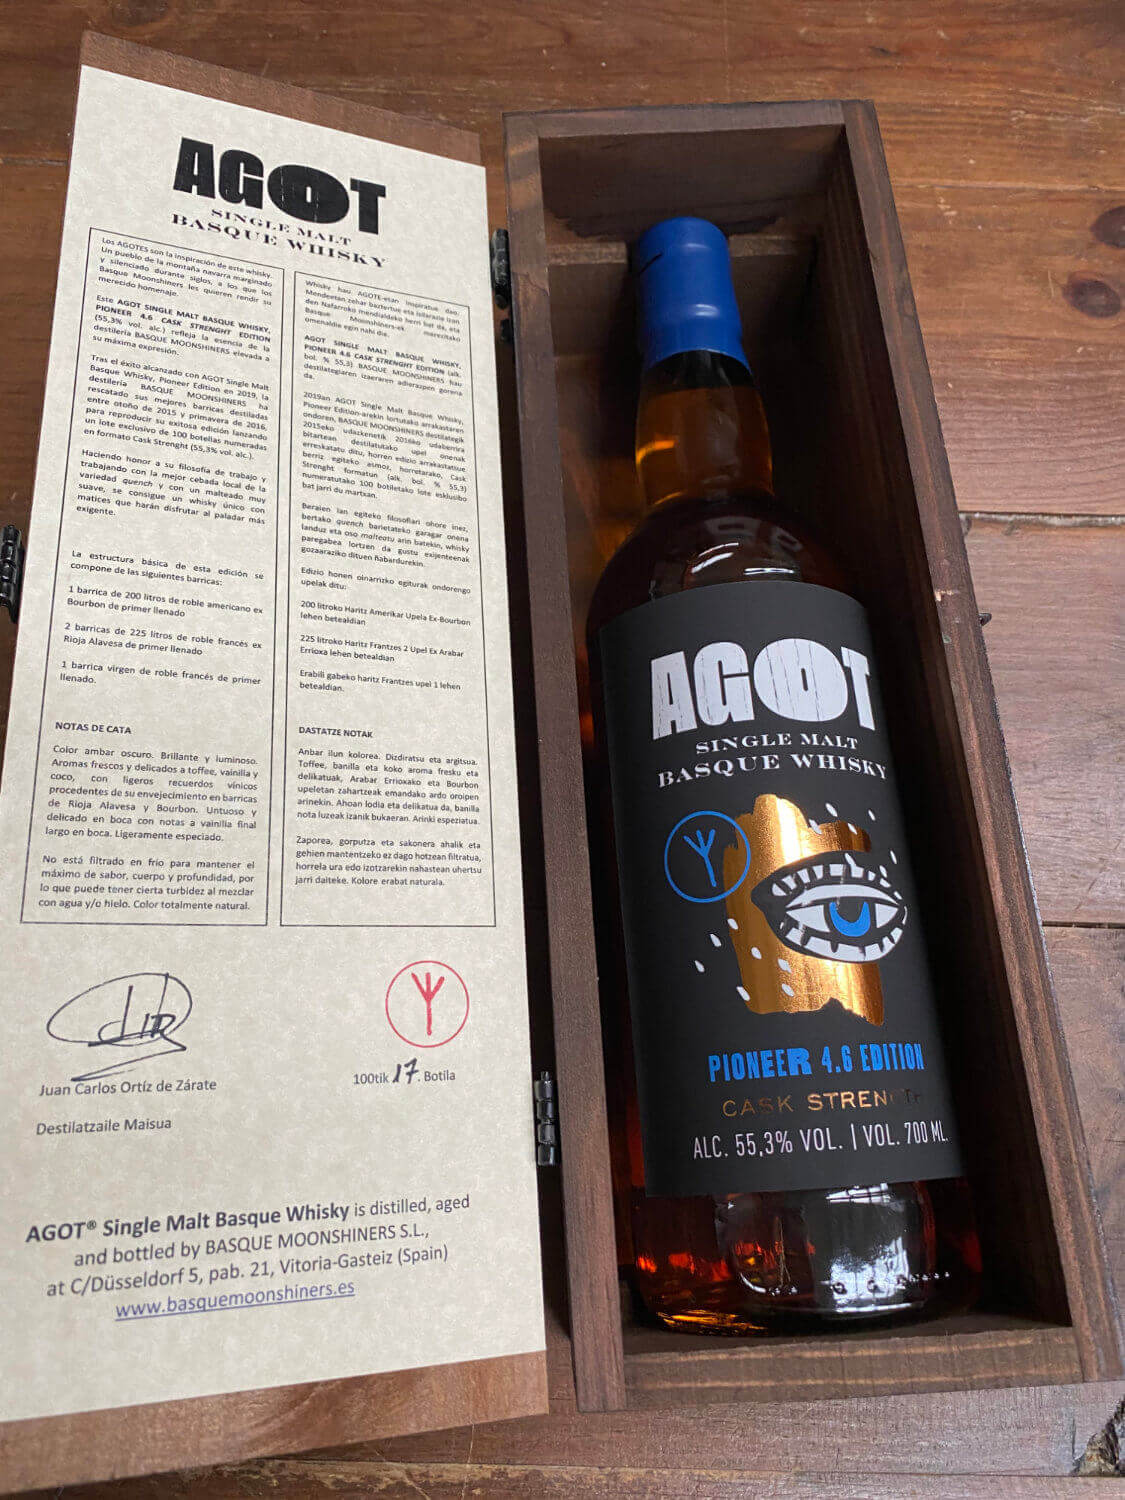 WHISKY AGOT 4.6 CASK STRENGHT EDITION